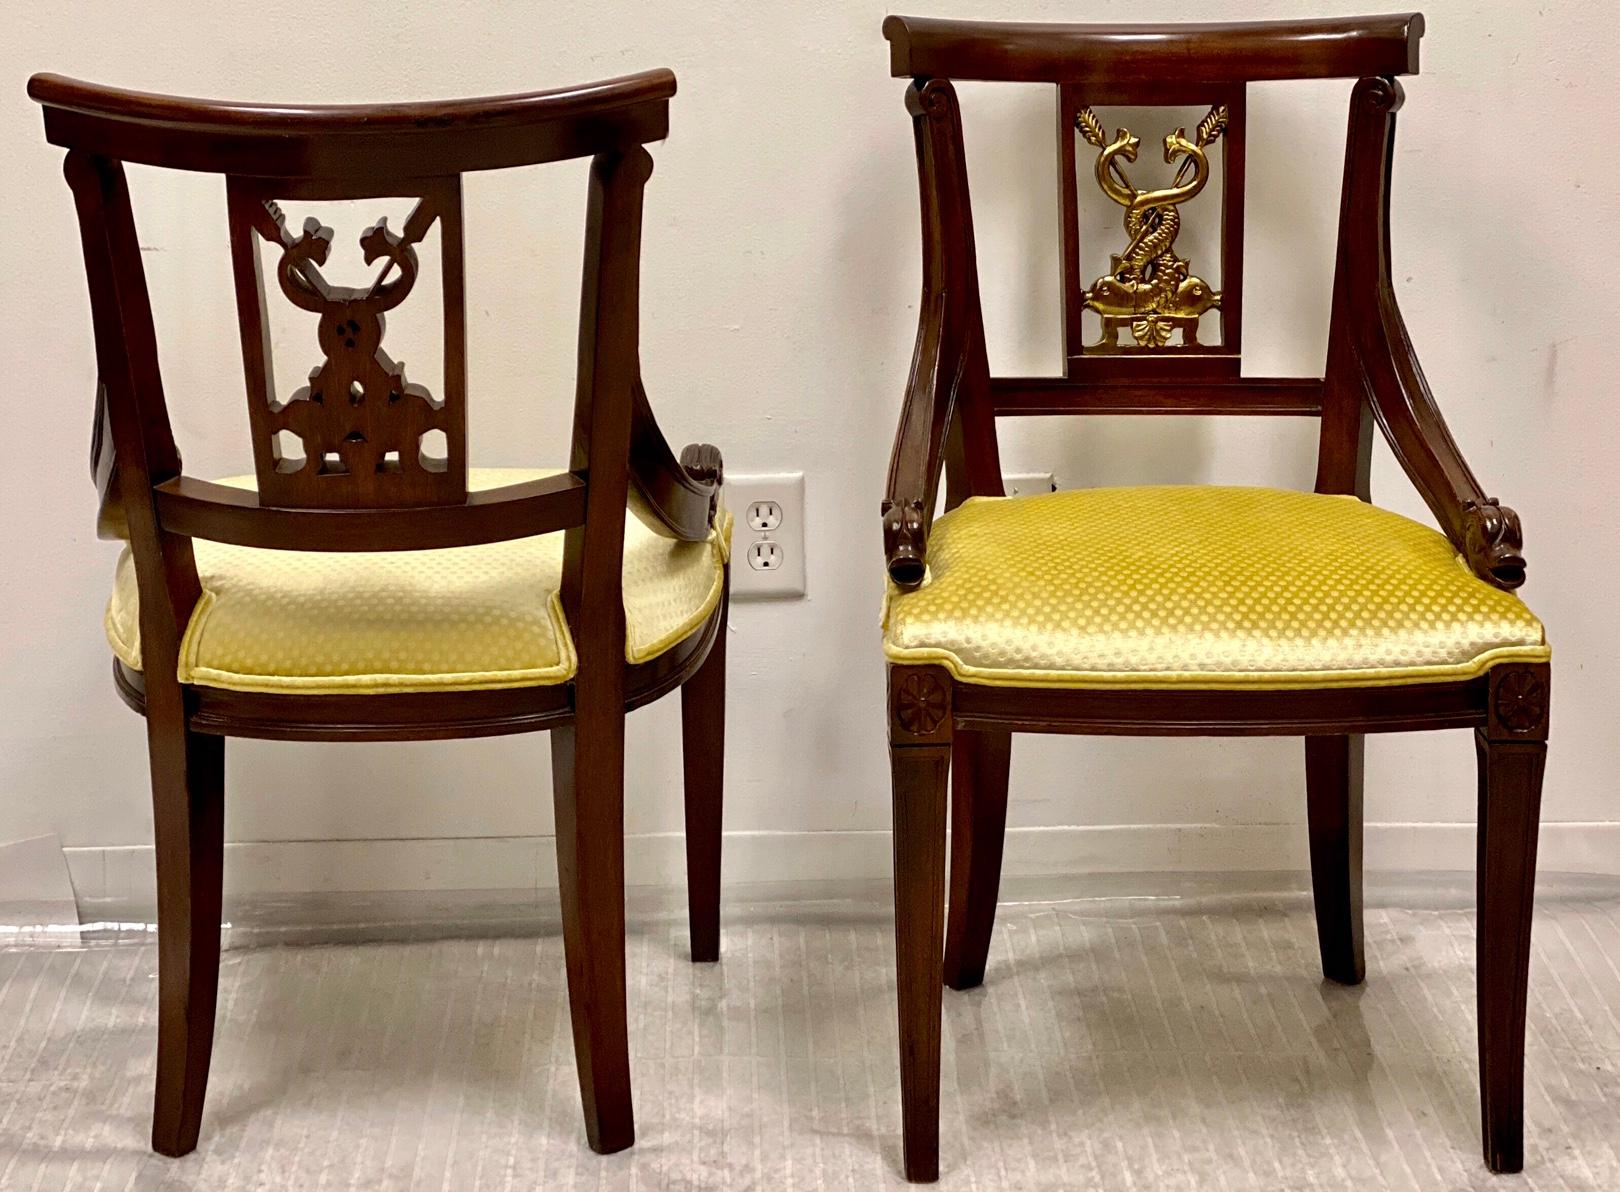 This is a pair of midcentury mahogany and gilt chairs that are attributed to Baker Furniture. The yellow upholstery is new. The carved dolphin and arrow backs are highlighted in gilt paint. They are in very good condition.